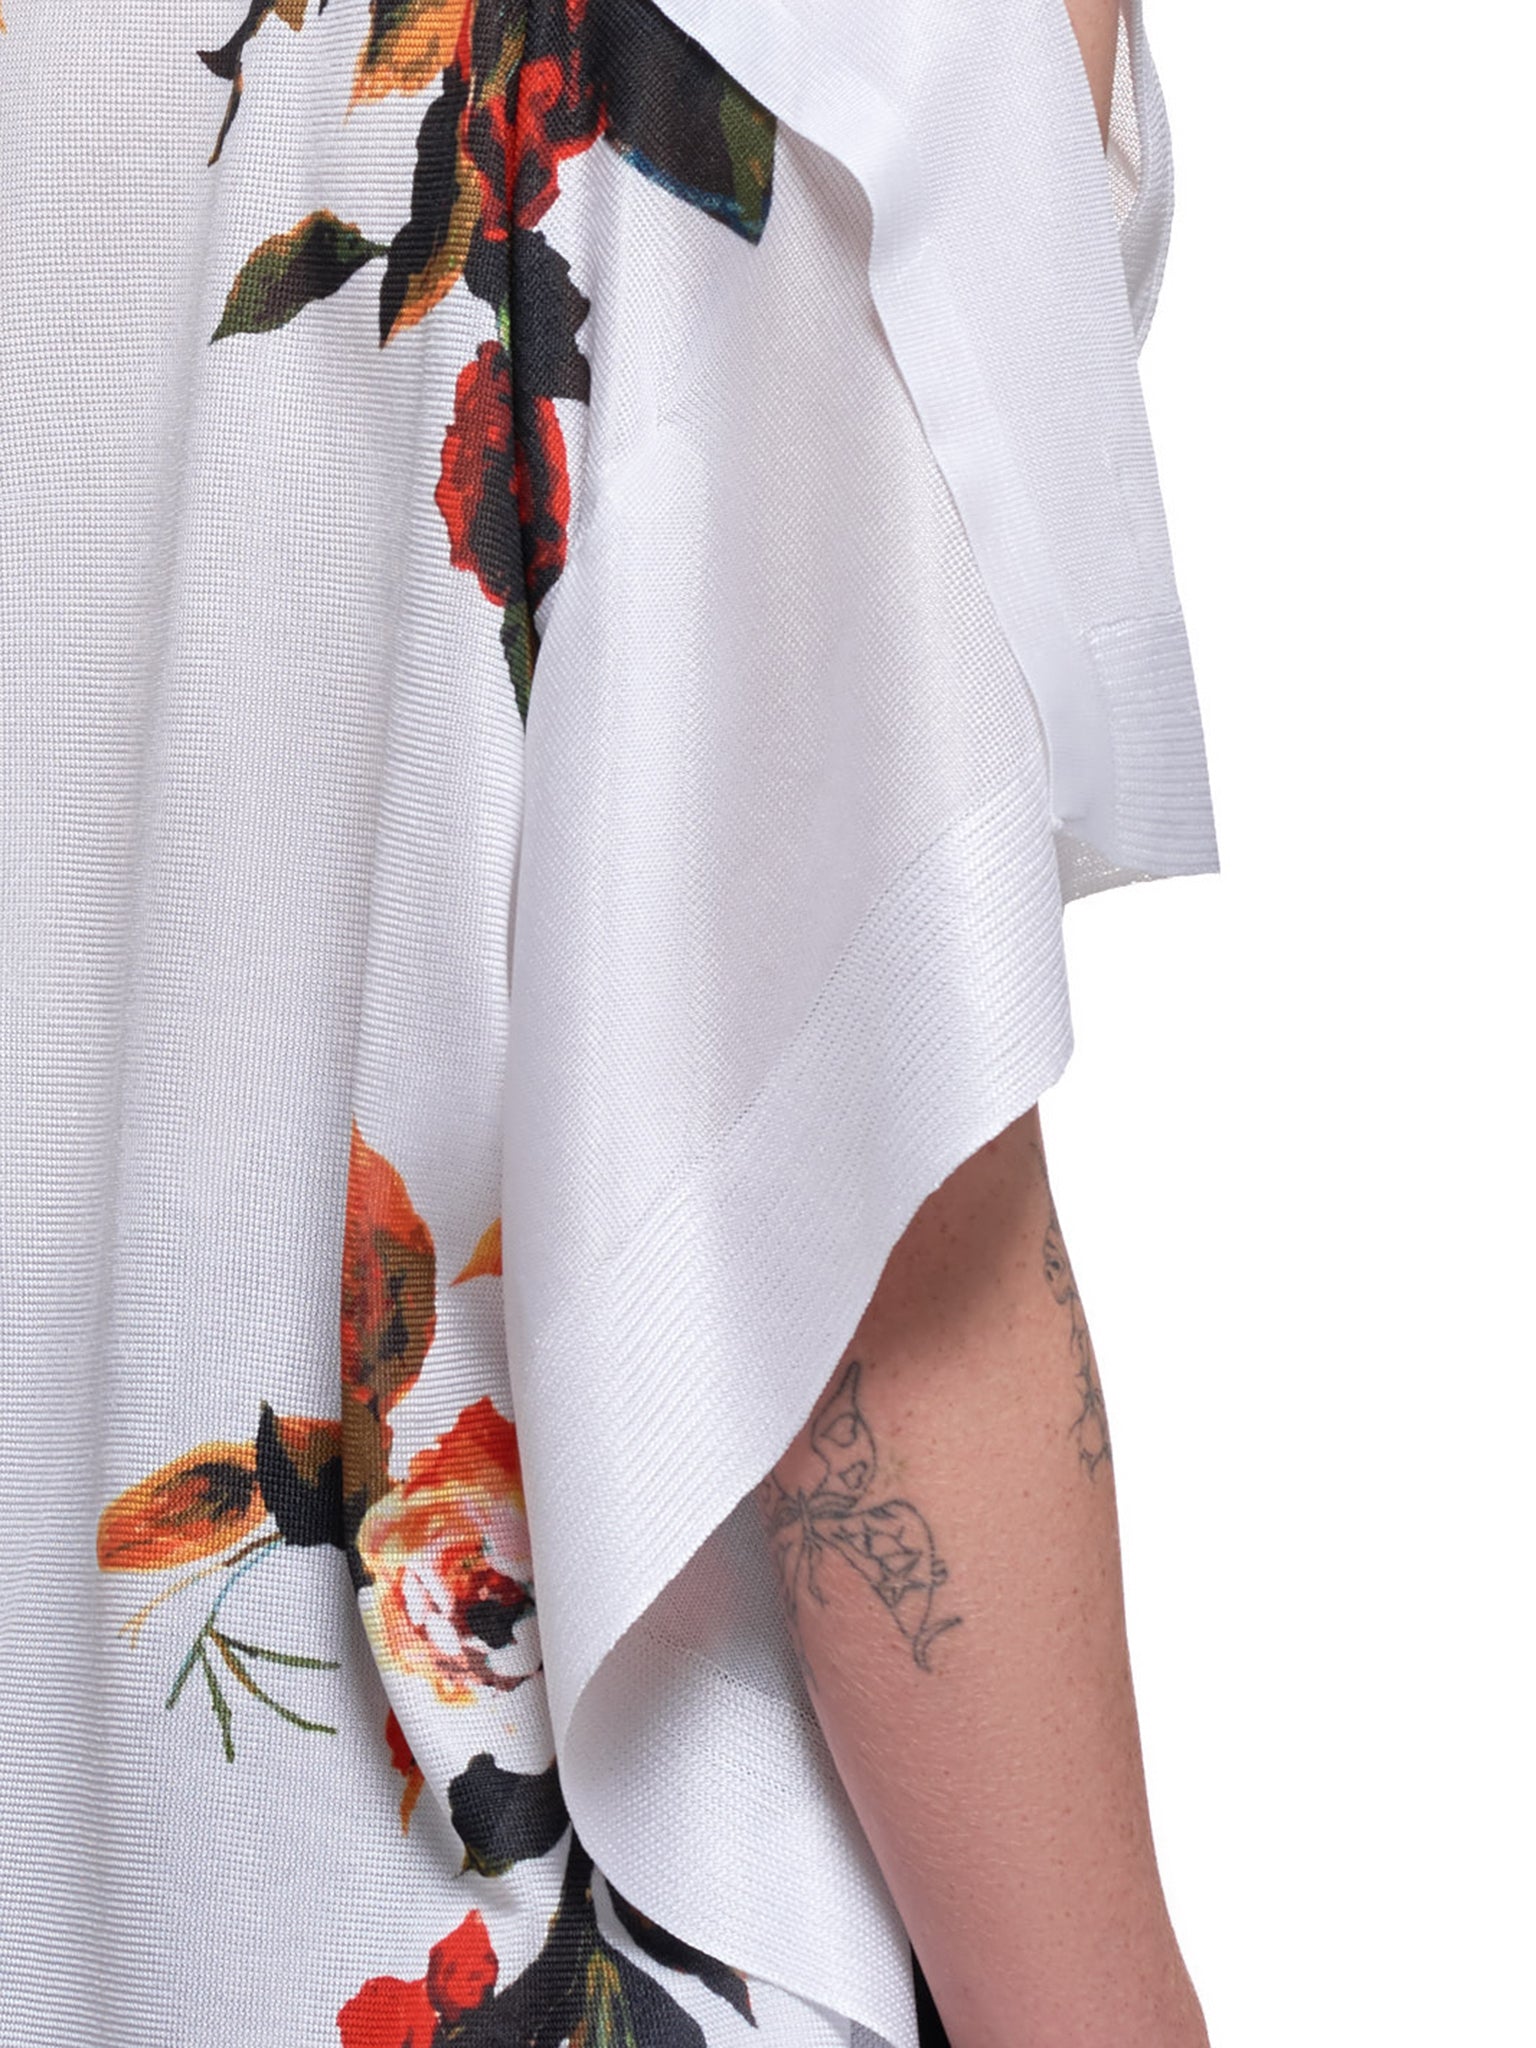 Toga Archives Top | H.Lorenzo Detail 2